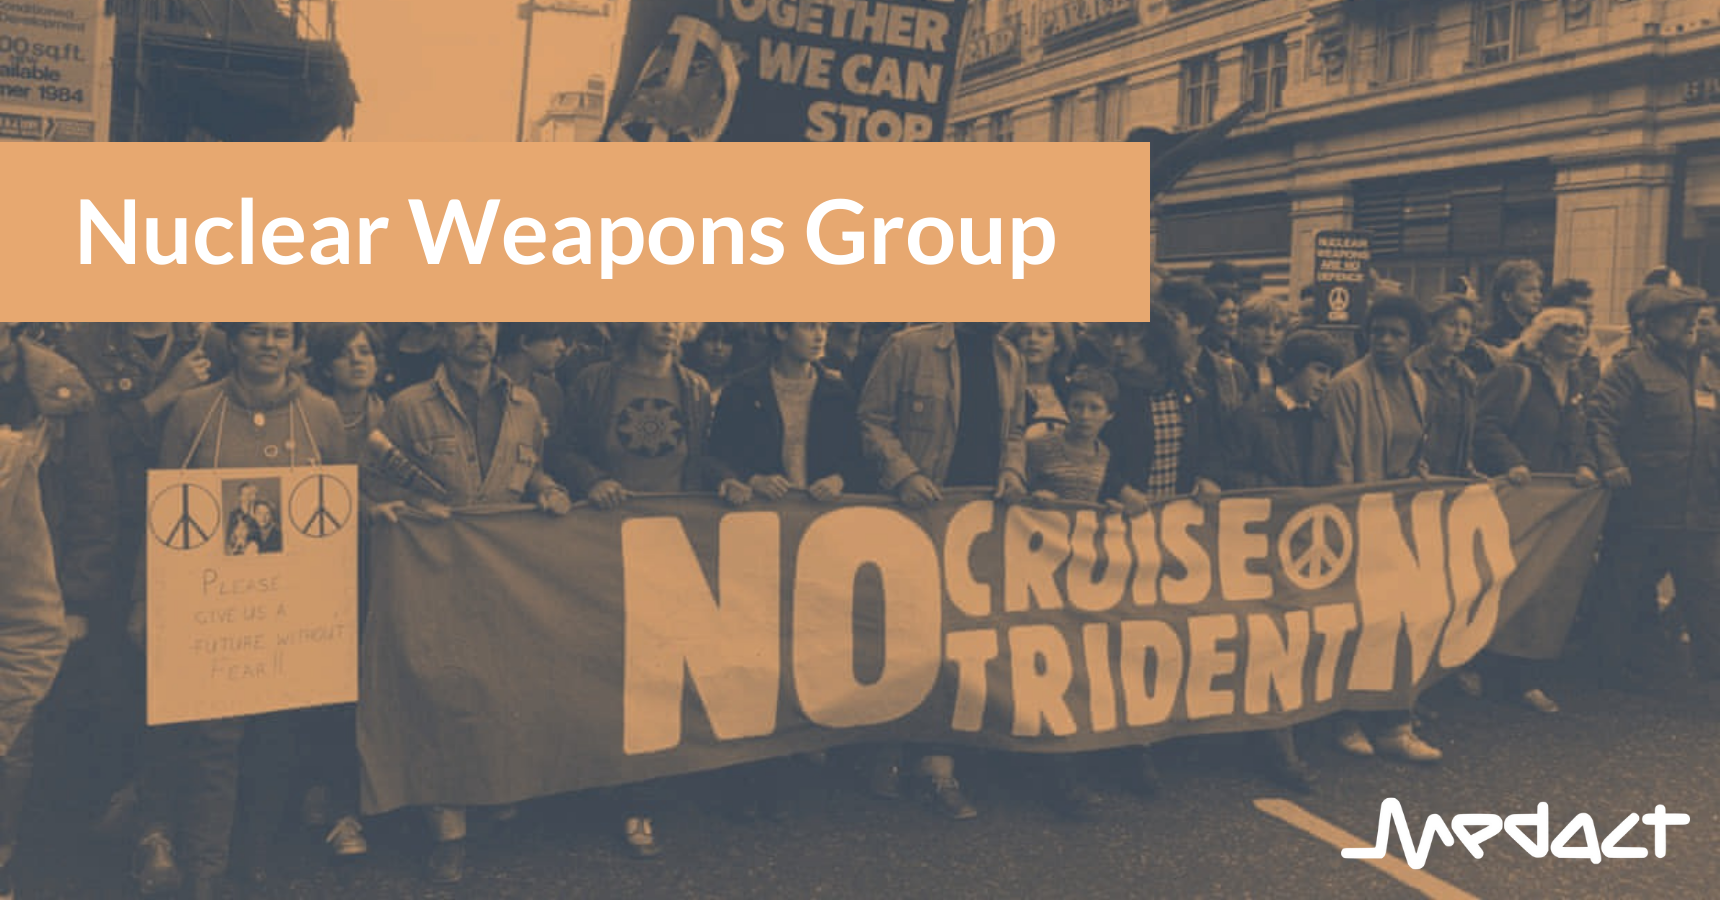 Nuclear Weapons Group Meeting